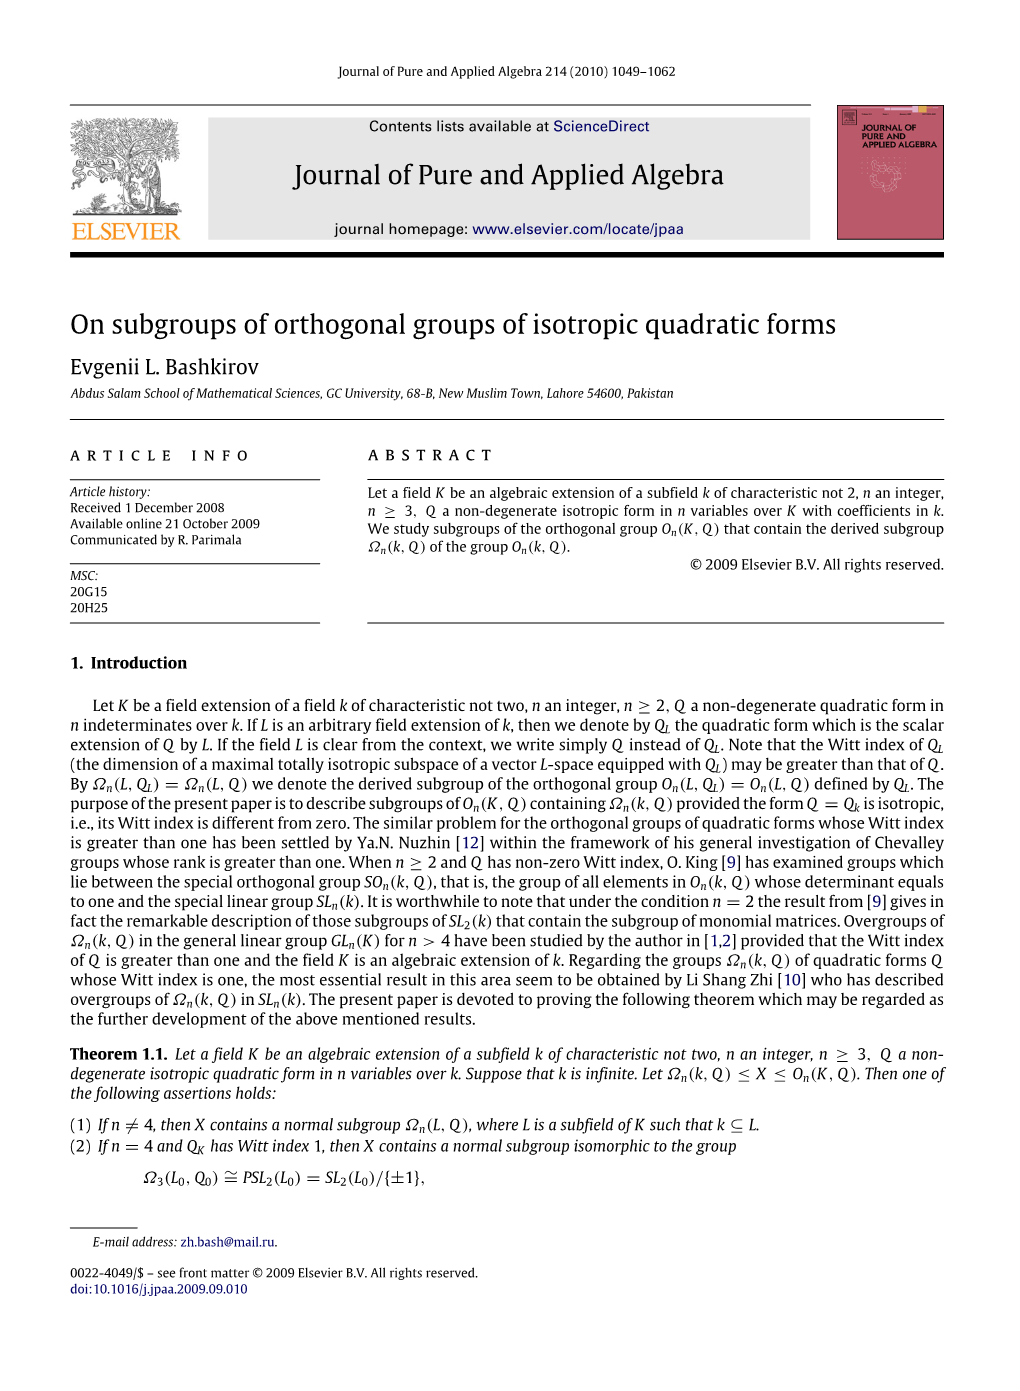 Journal of Pure and Applied Algebra on Subgroups of Orthogonal Groups